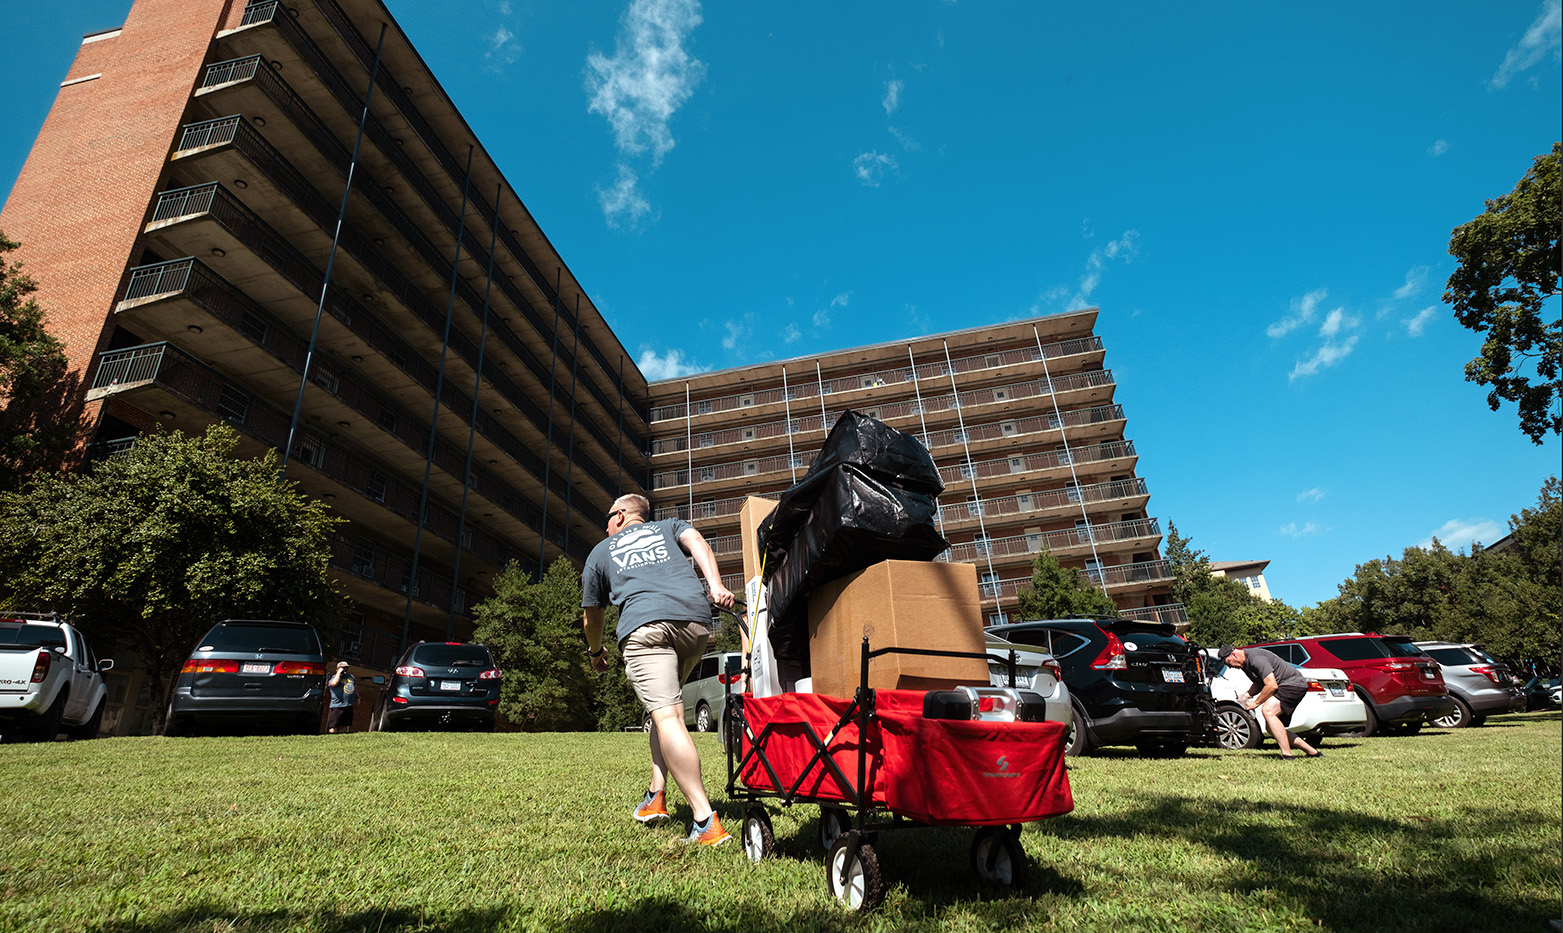 A man using a wagon to transport boxes and bags on a lawn outside of a dormitory.